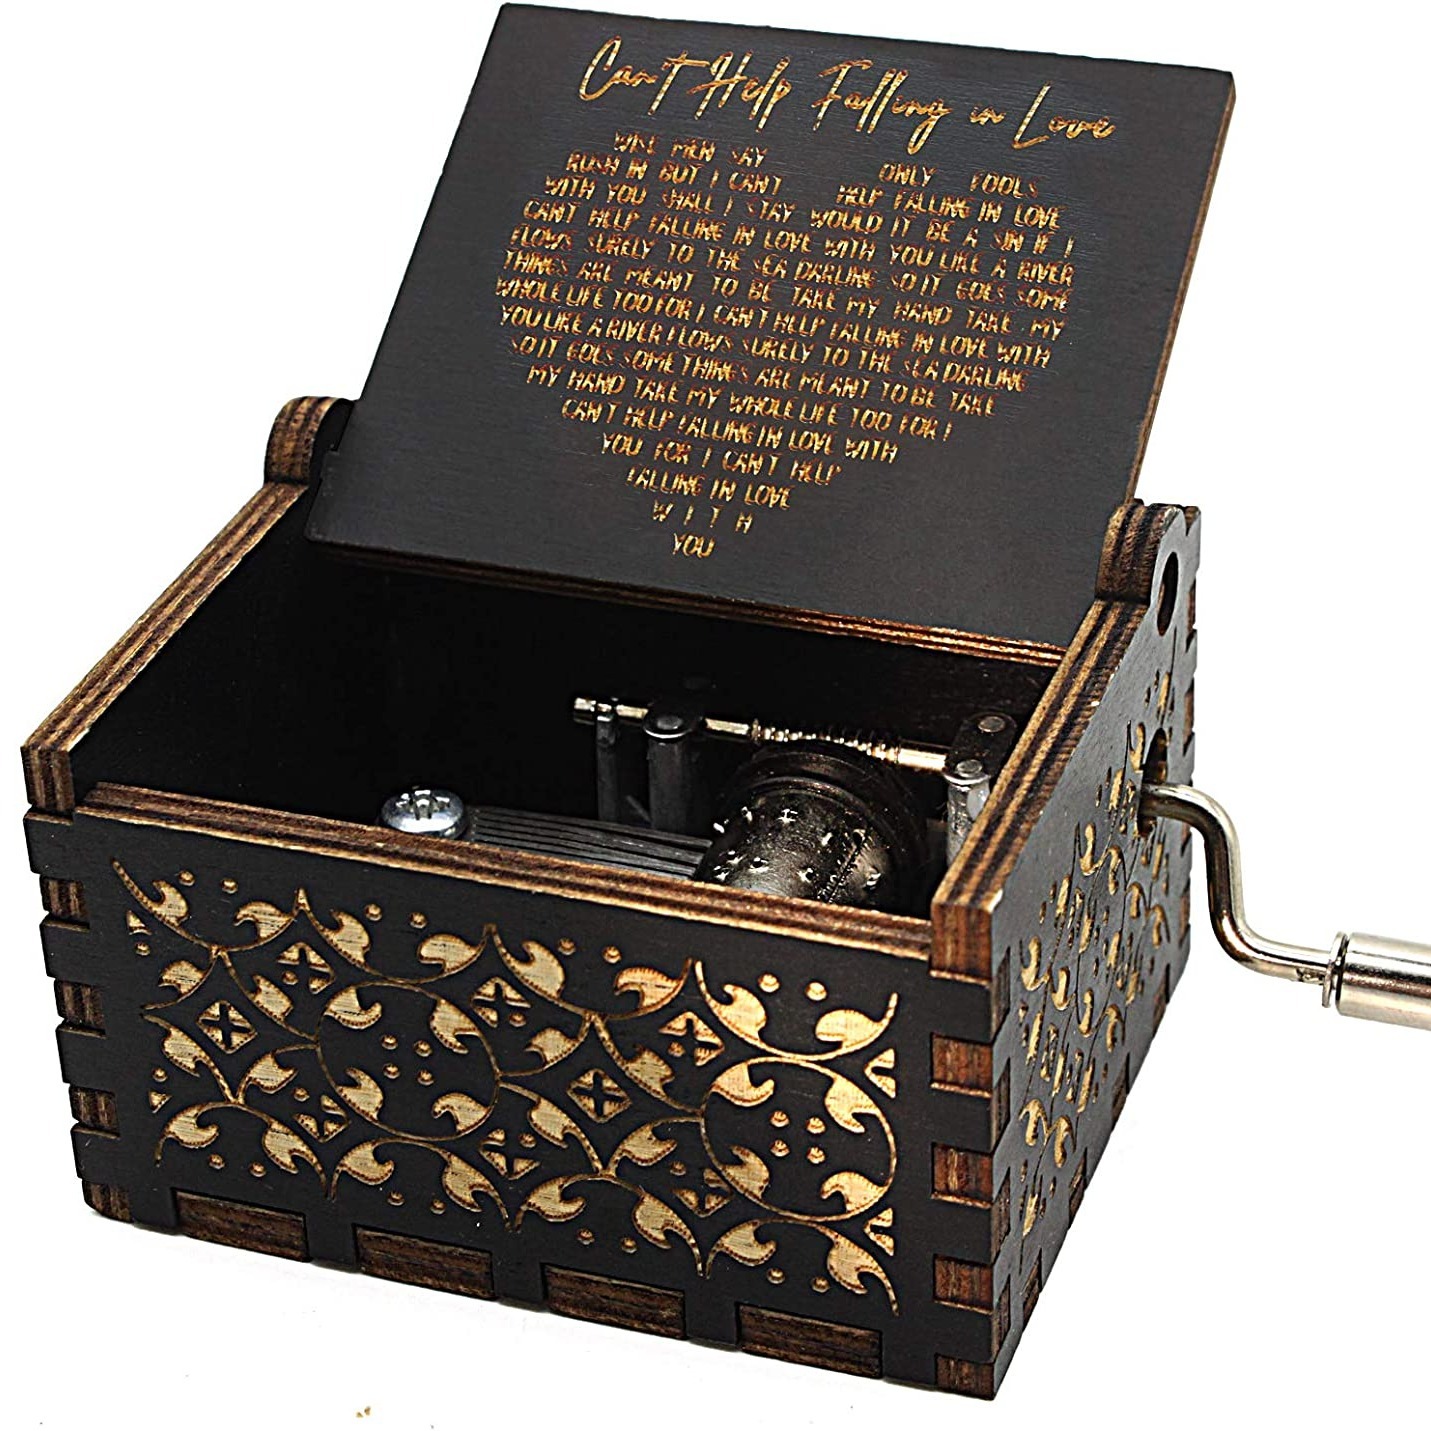  Mi*AngMax Legend of Zelda Theme Wooden Music Box - Antique  Engraved Musical Boxes Case for Wooden Zelda Gifts - Wedding Valentine  Christmas Musical Gift (Black) : Home & Kitchen